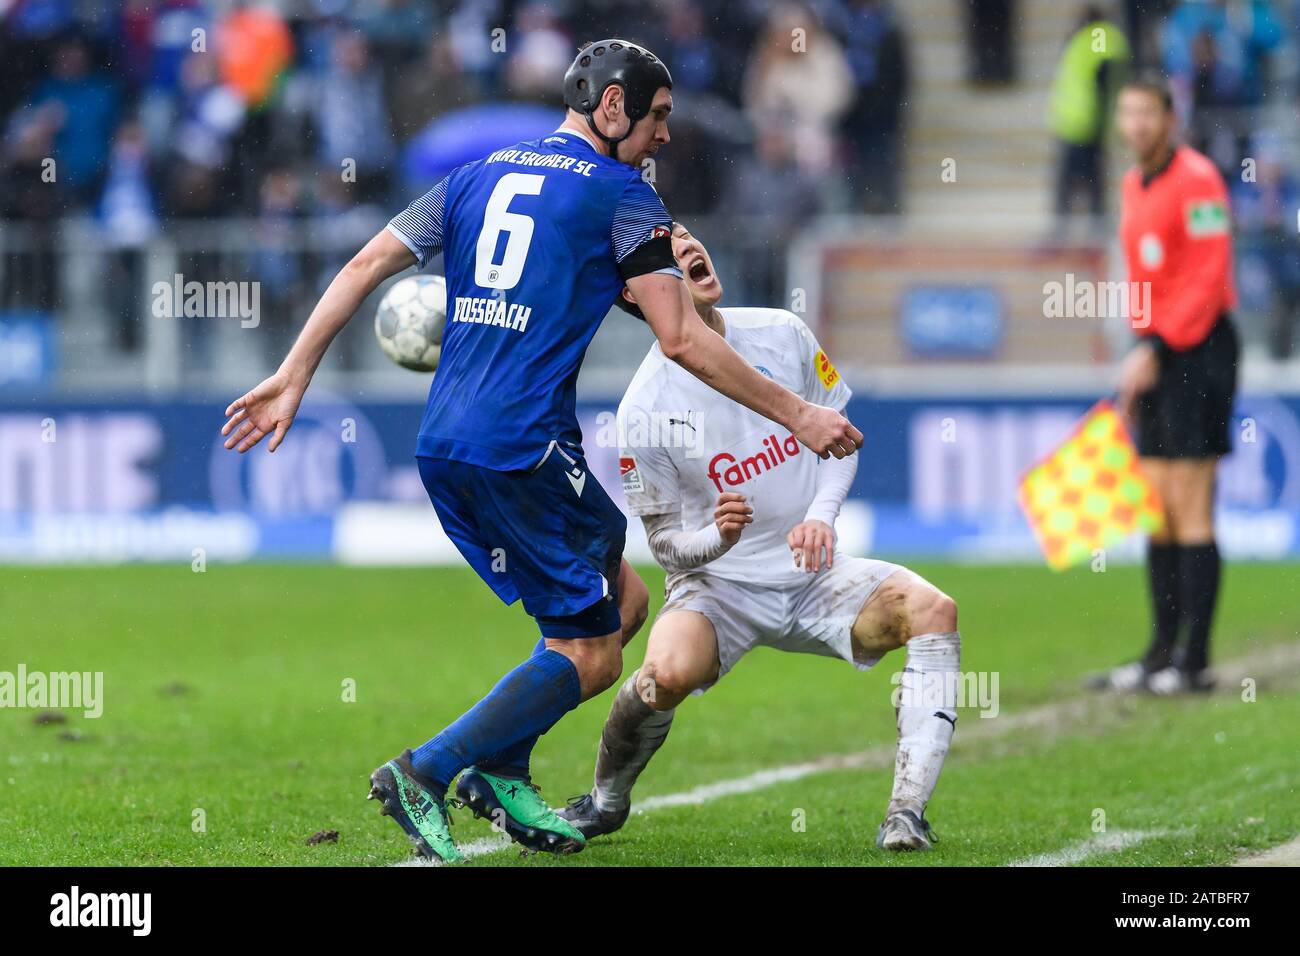 Karlsruhe, Deutschland. 01st Feb, 2020. Damian Rossbach (KSC) in duels with Jae-sung Lee (Holstein Kiel). Damian Rossbach (KSC) got the red card after this foul. GES/Football/2nd Bundesliga: Karlsruher SC - Holstein Kiel, 01.02.2020 Football/Soccer: 2nd Bundesliga: KSC vs Holstein Kiel, Karlsruhe, February 1, 2020 | usage worldwide Credit: dpa/Alamy Live News Credit: dpa picture alliance/Alamy Live News Stock Photo